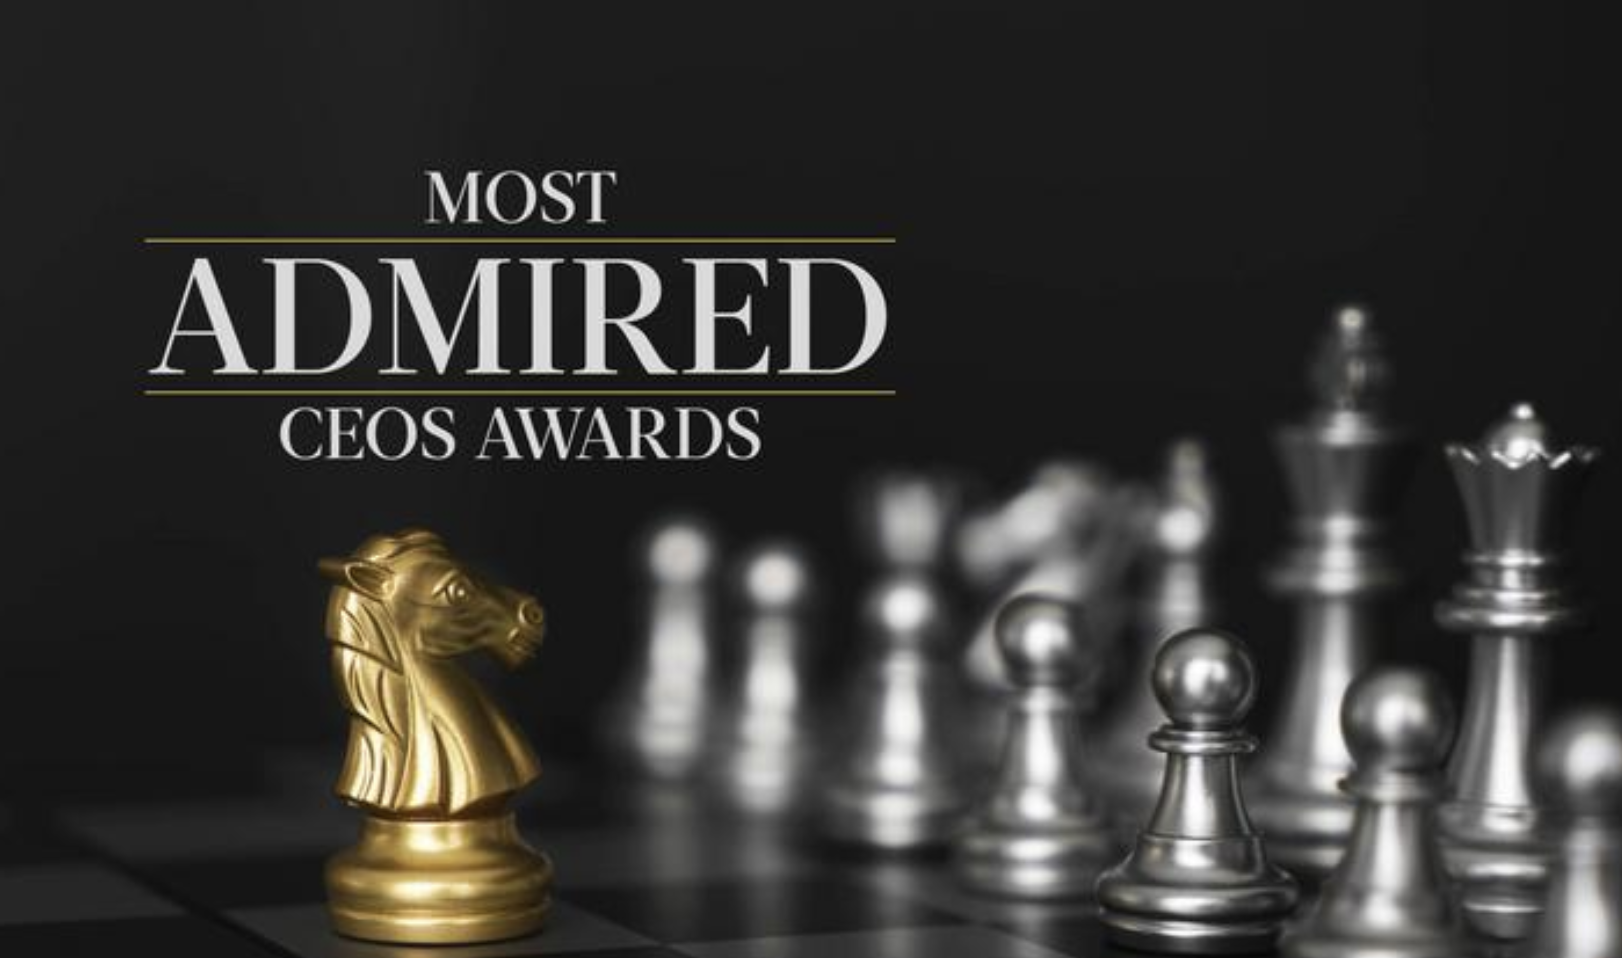 Business First award for the Most Admired CEOs